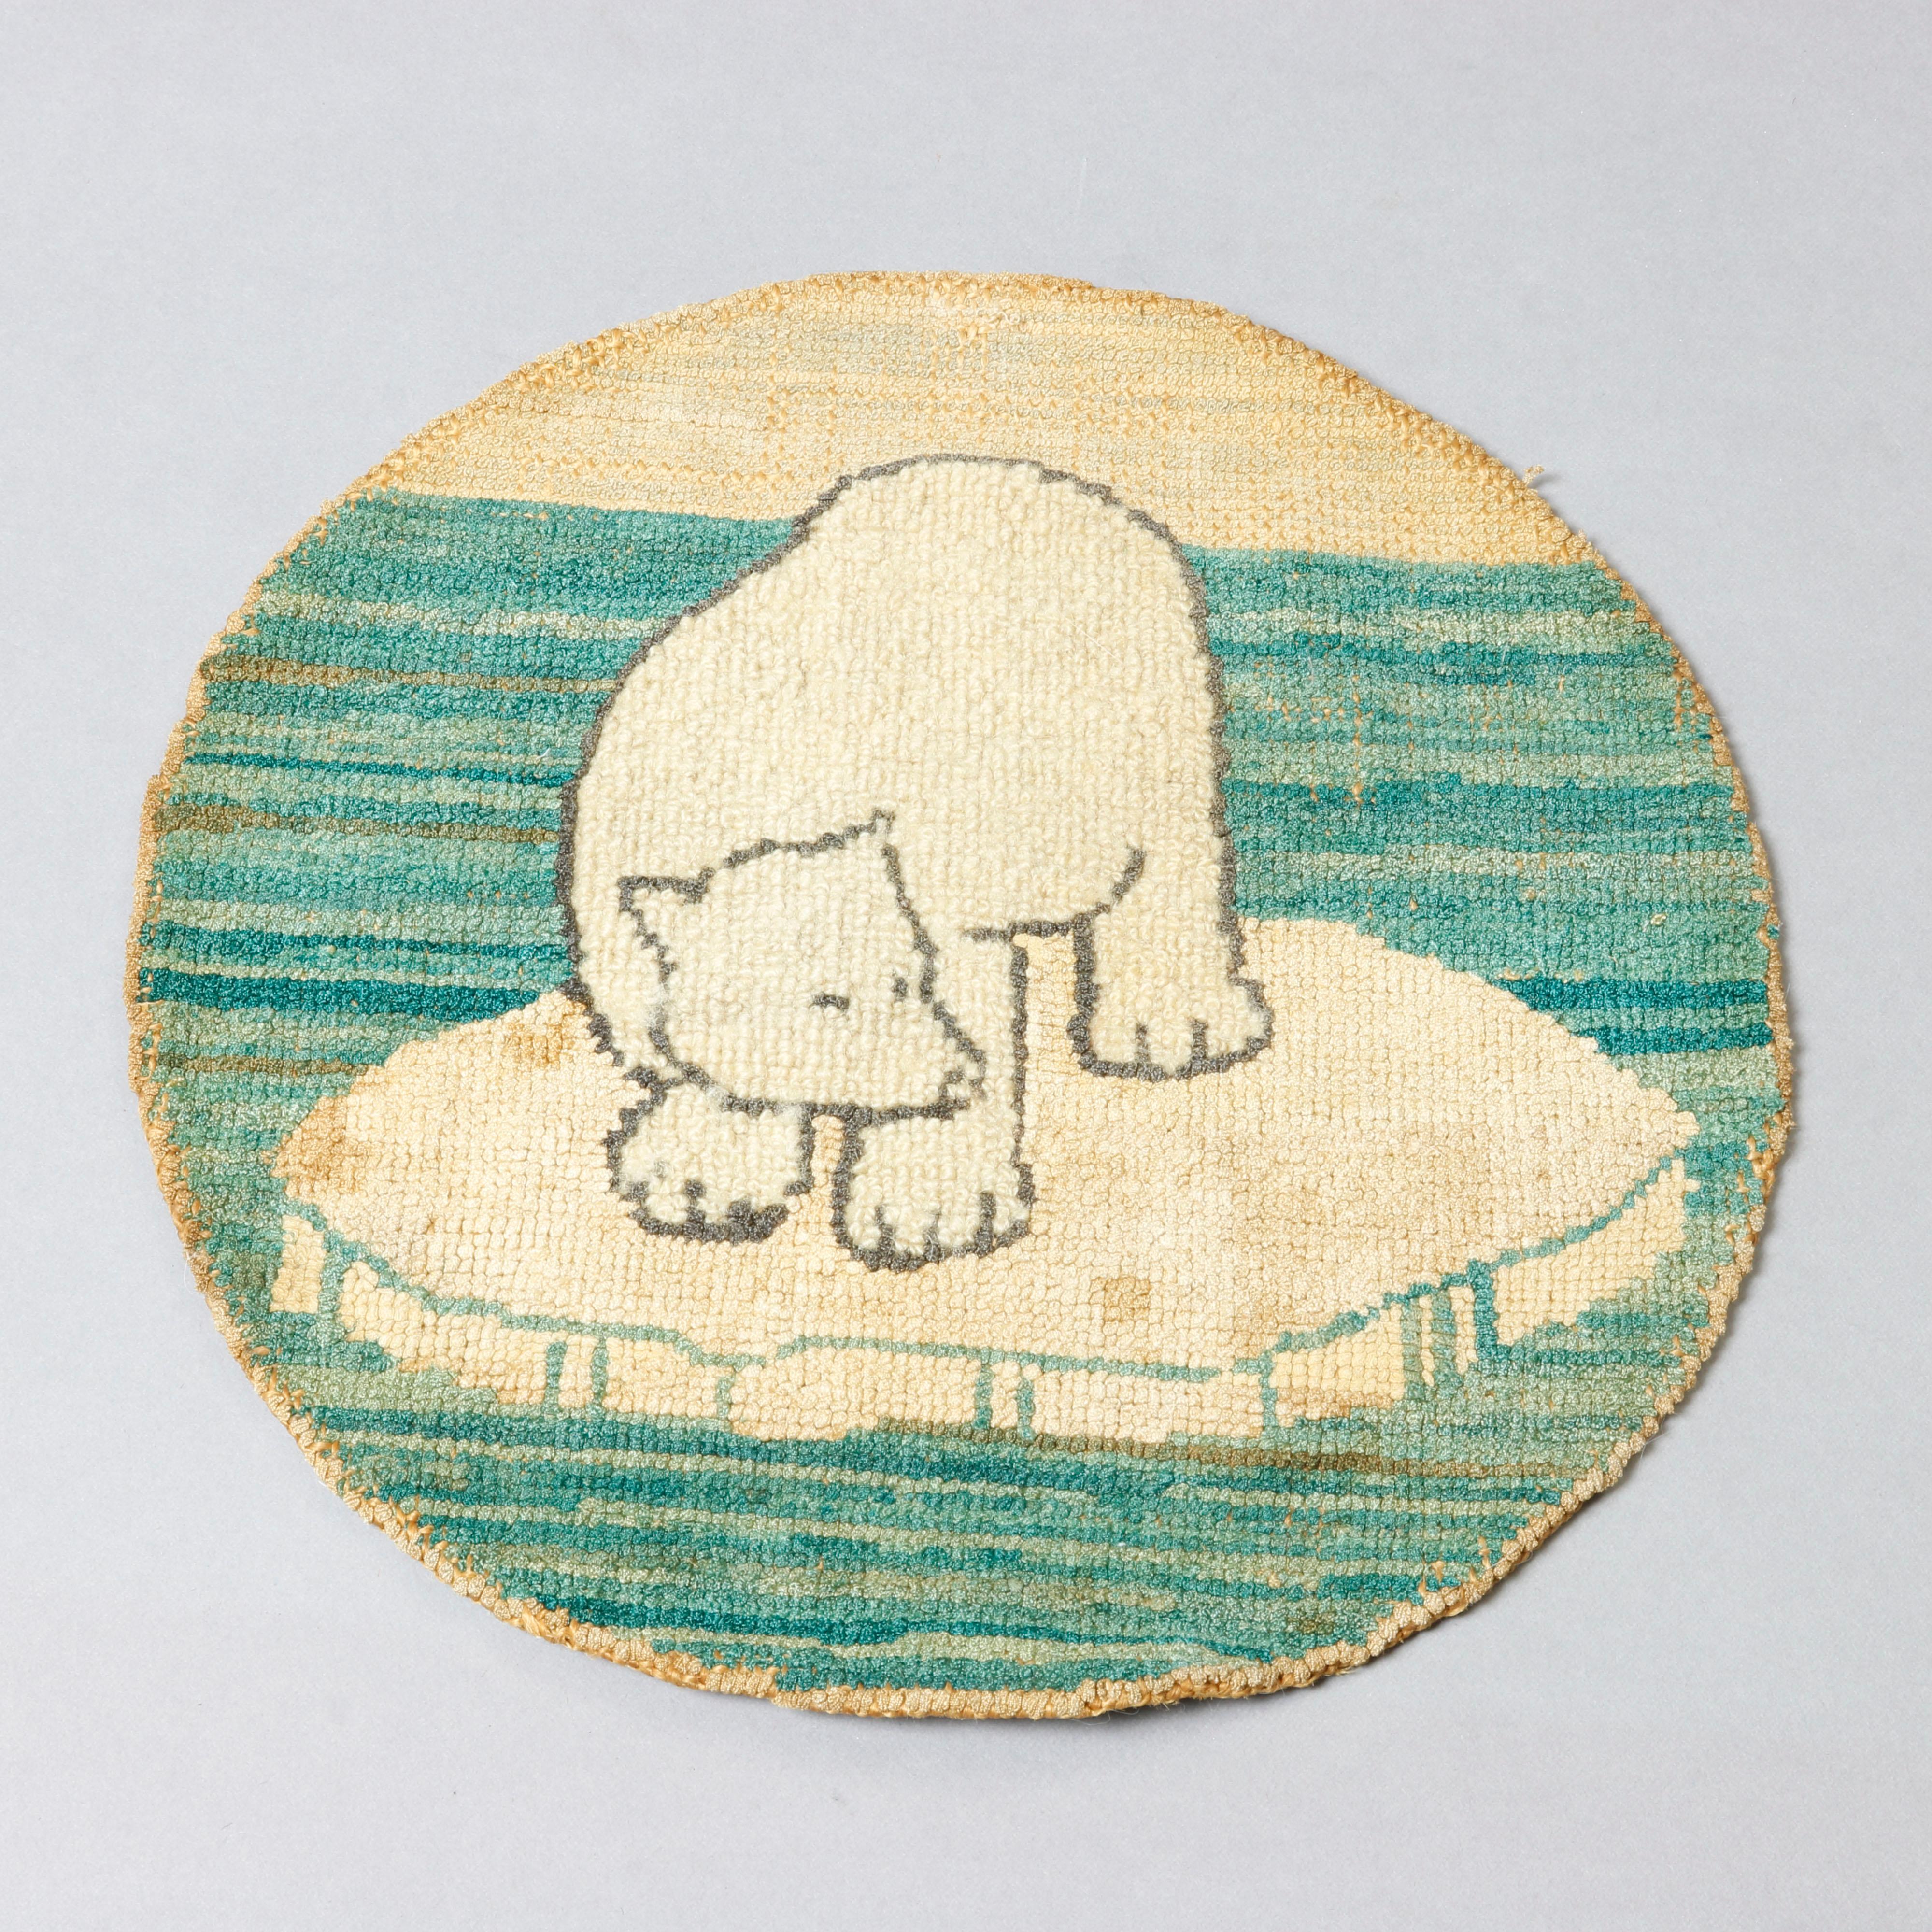 Canadian Two Antique Grenfell Labrador Hand Knotted Mats, Ship and Polar Bear, circa 1920